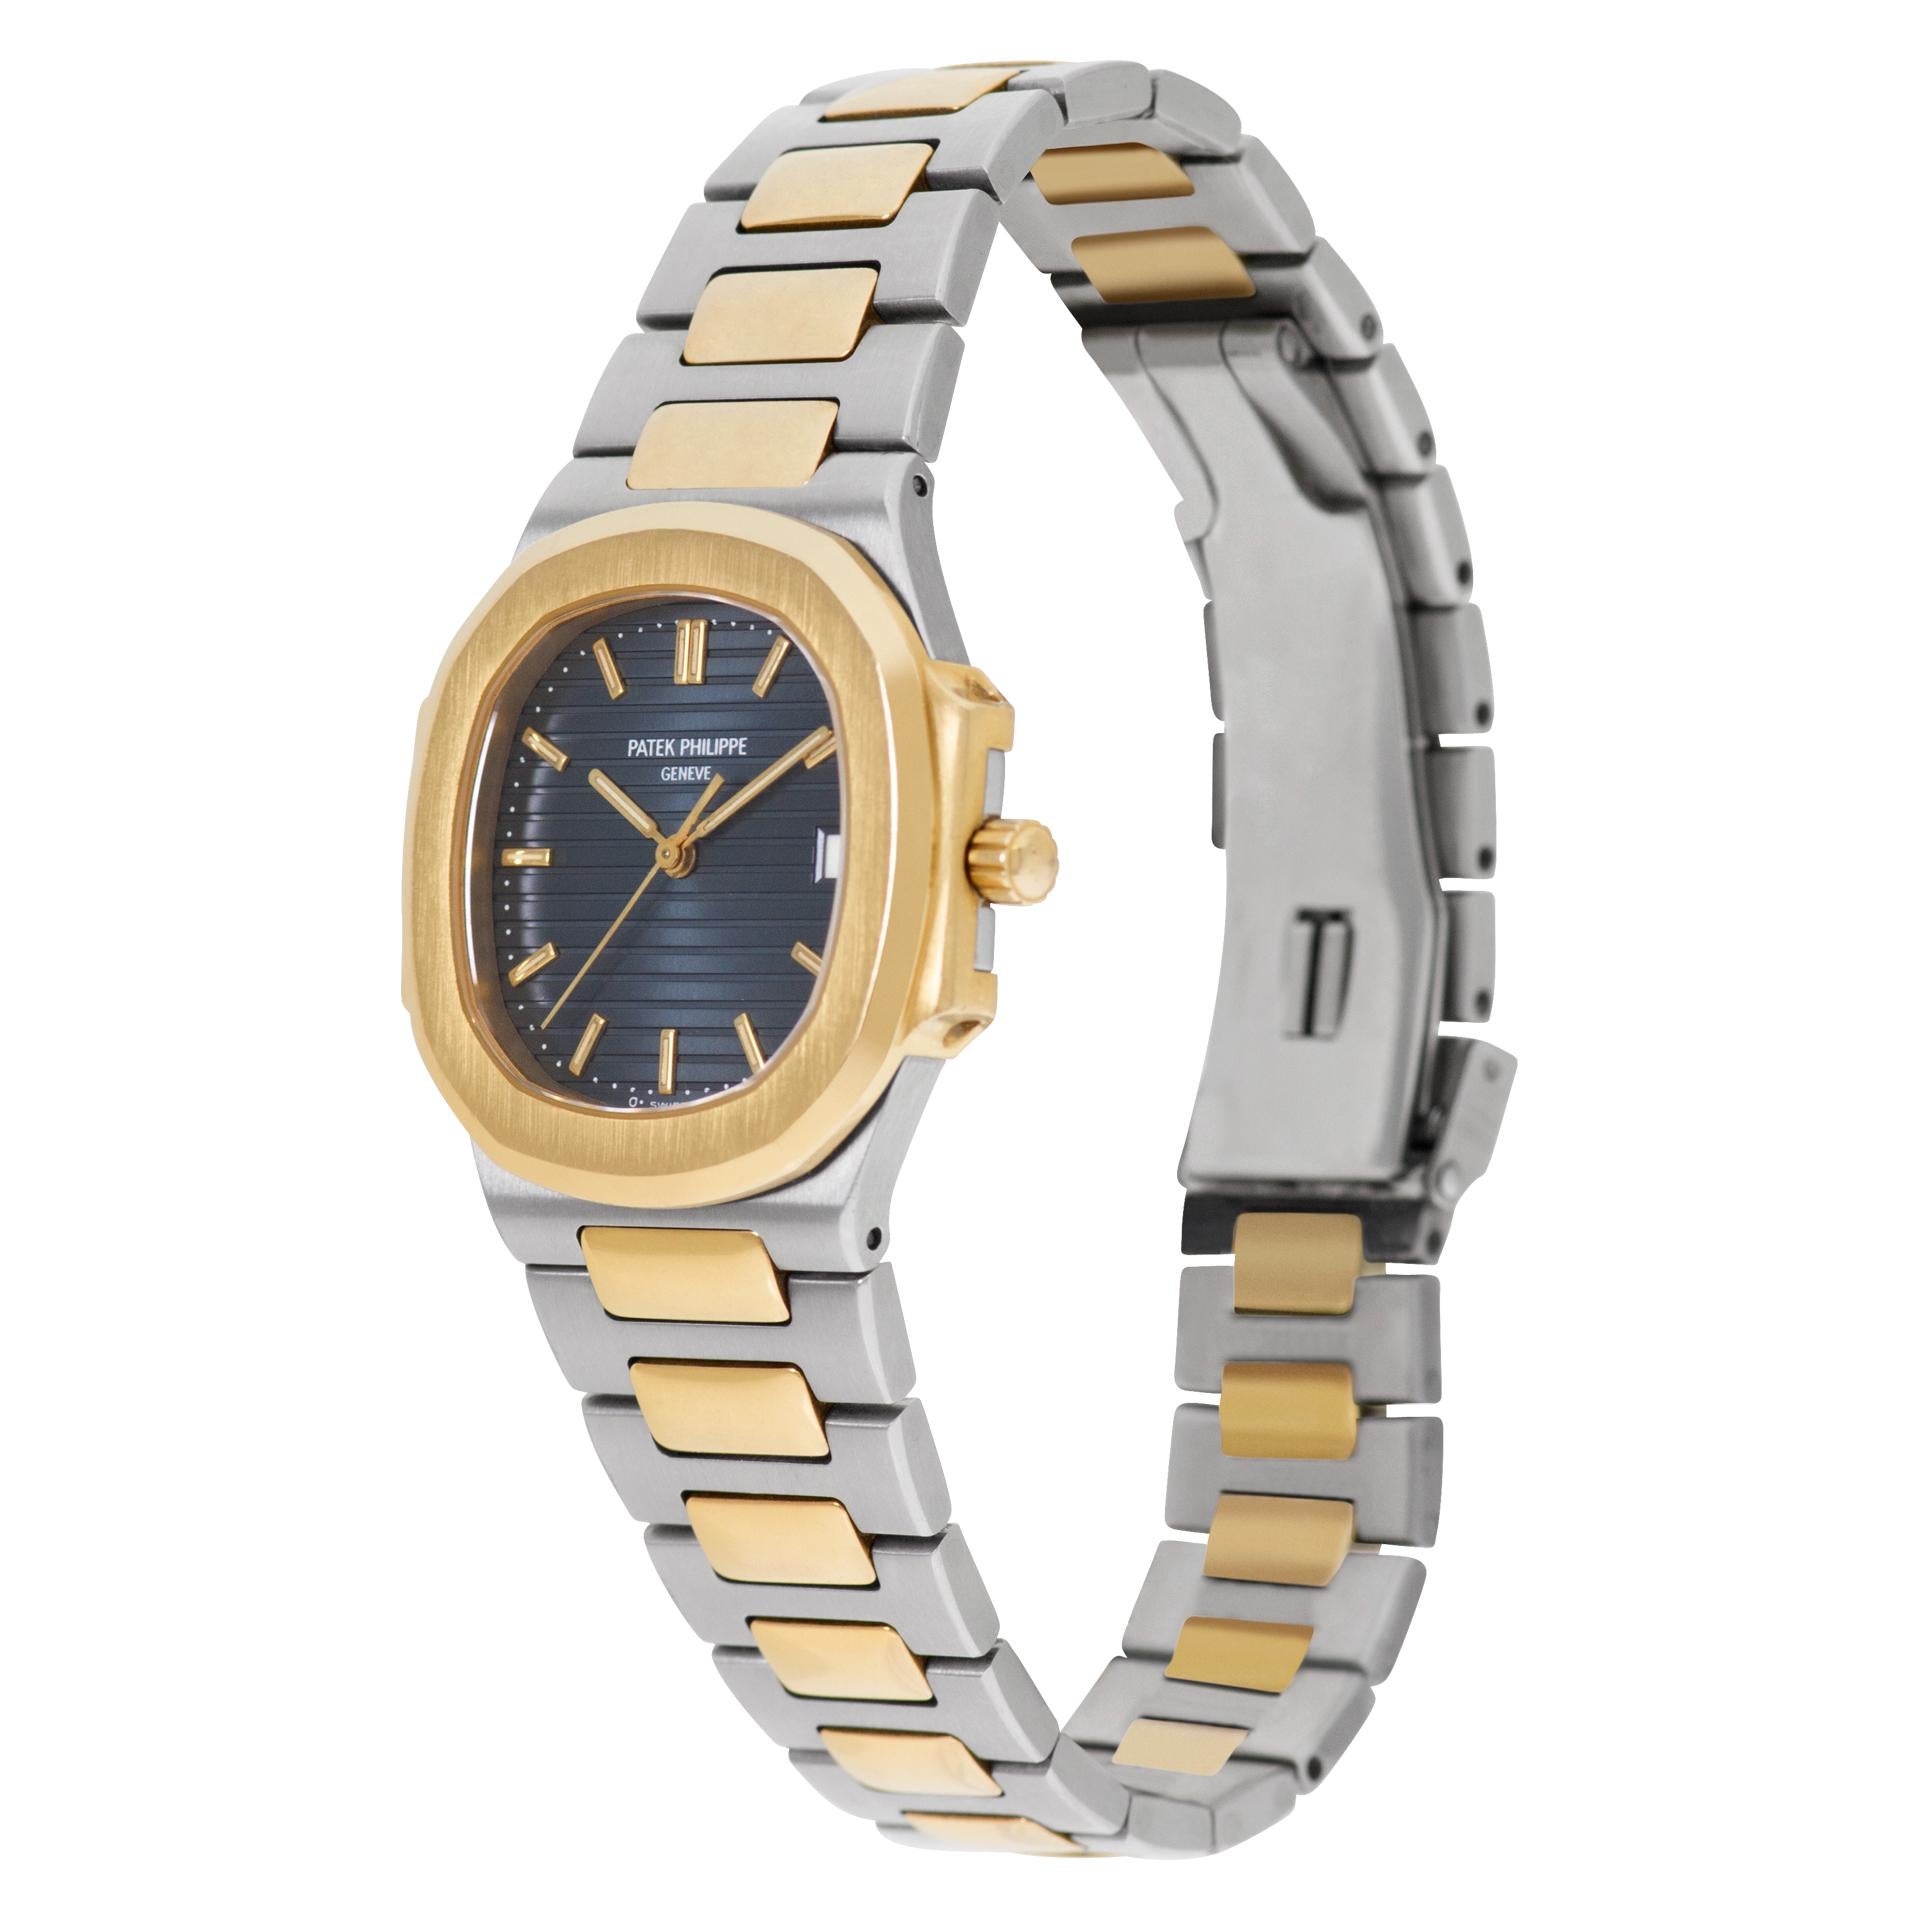 Patek Philippe Nautilus in 18k & stainless steel. Quartz w/ sweep seconds and date. 33 mm case size. With PP pouch. Ref 3900. **Bank Wire Only at this price** Fine Pre-owned Patek Philippe Watch. Certified preowned Sport Patek Philippe Nautilus 3900